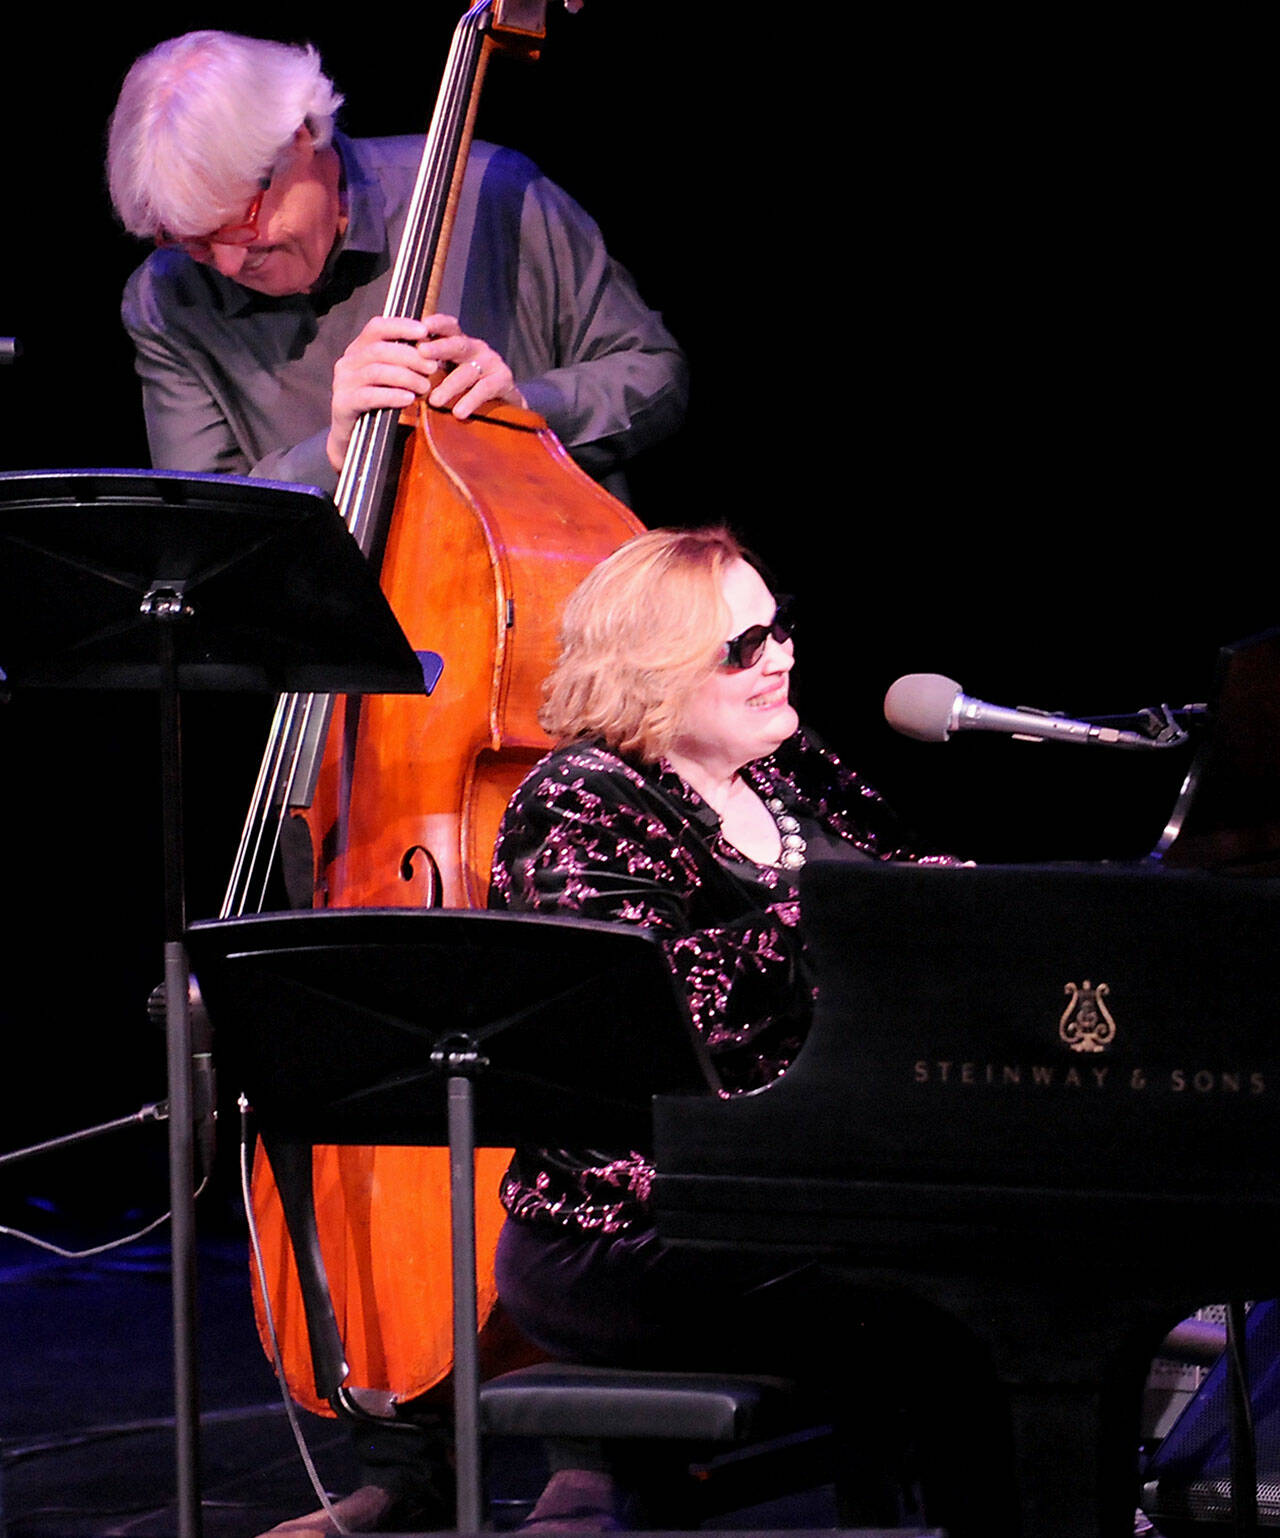 American jazz singer Diane “Deedles” Schuur, front, along with bassist Bruce Phares, perform in the Donna M. Morris Theater at the Field Arts & Events Hall in Port Angeles during Friday night’s opening weekend show. (Keith Thorpe/Peninsula Daily News)